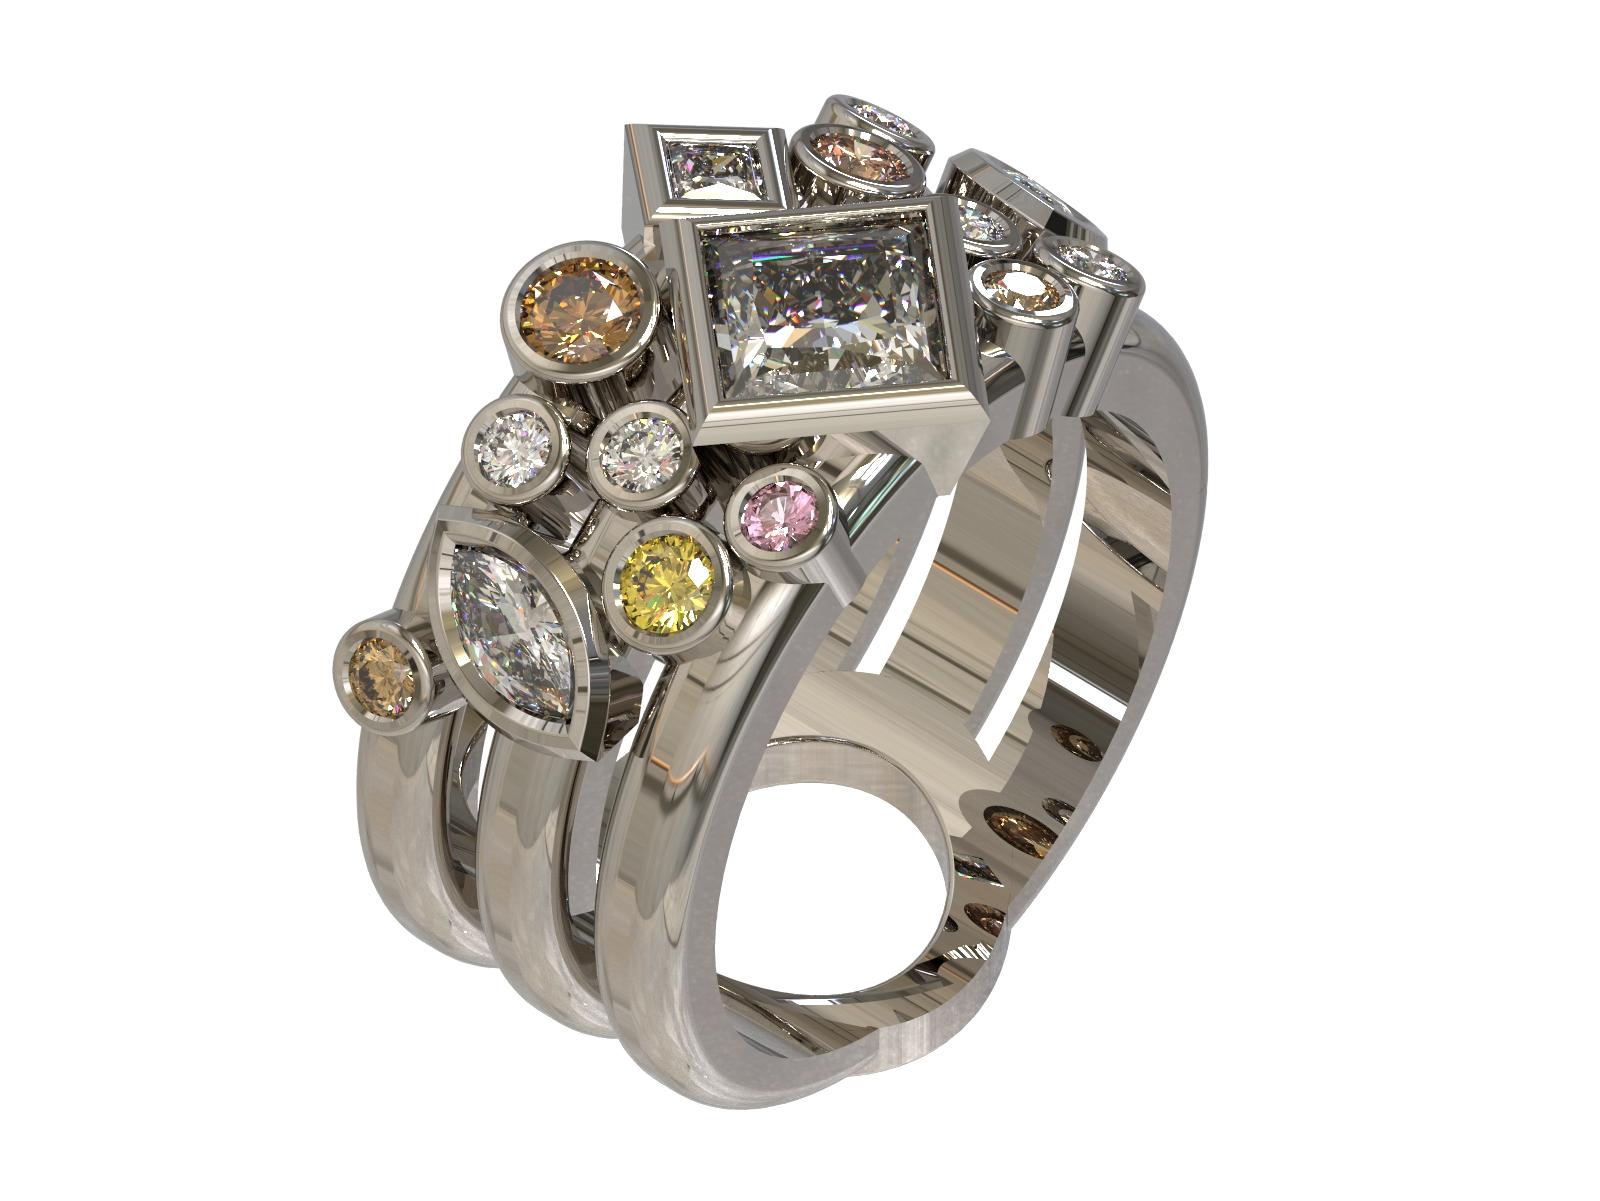 Multi-Color Diamante Ring

This eye-catching 18 carat white gold ring has been sold but we are able to remake this ring with your choice of metal and gemstones. This ring features multi-color and multi shape diamonds. A large white princess cut